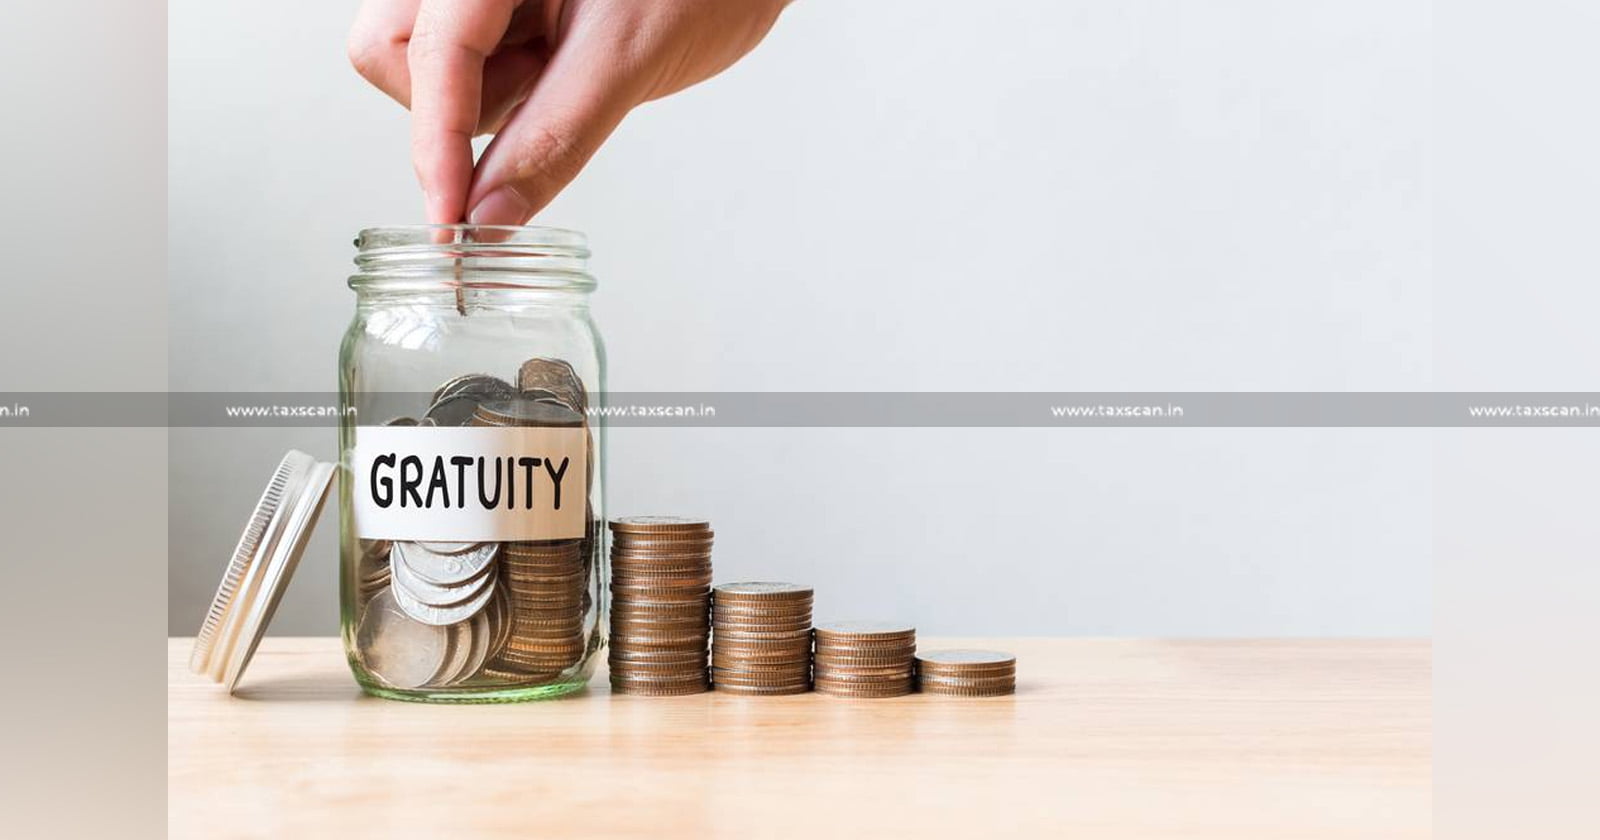 Provision of Gratuity - deduction of Actual Gratuity charged to Profit in P - L Account - disallowance - ITAT directs AO for fresh Consideration - TAXSCAN